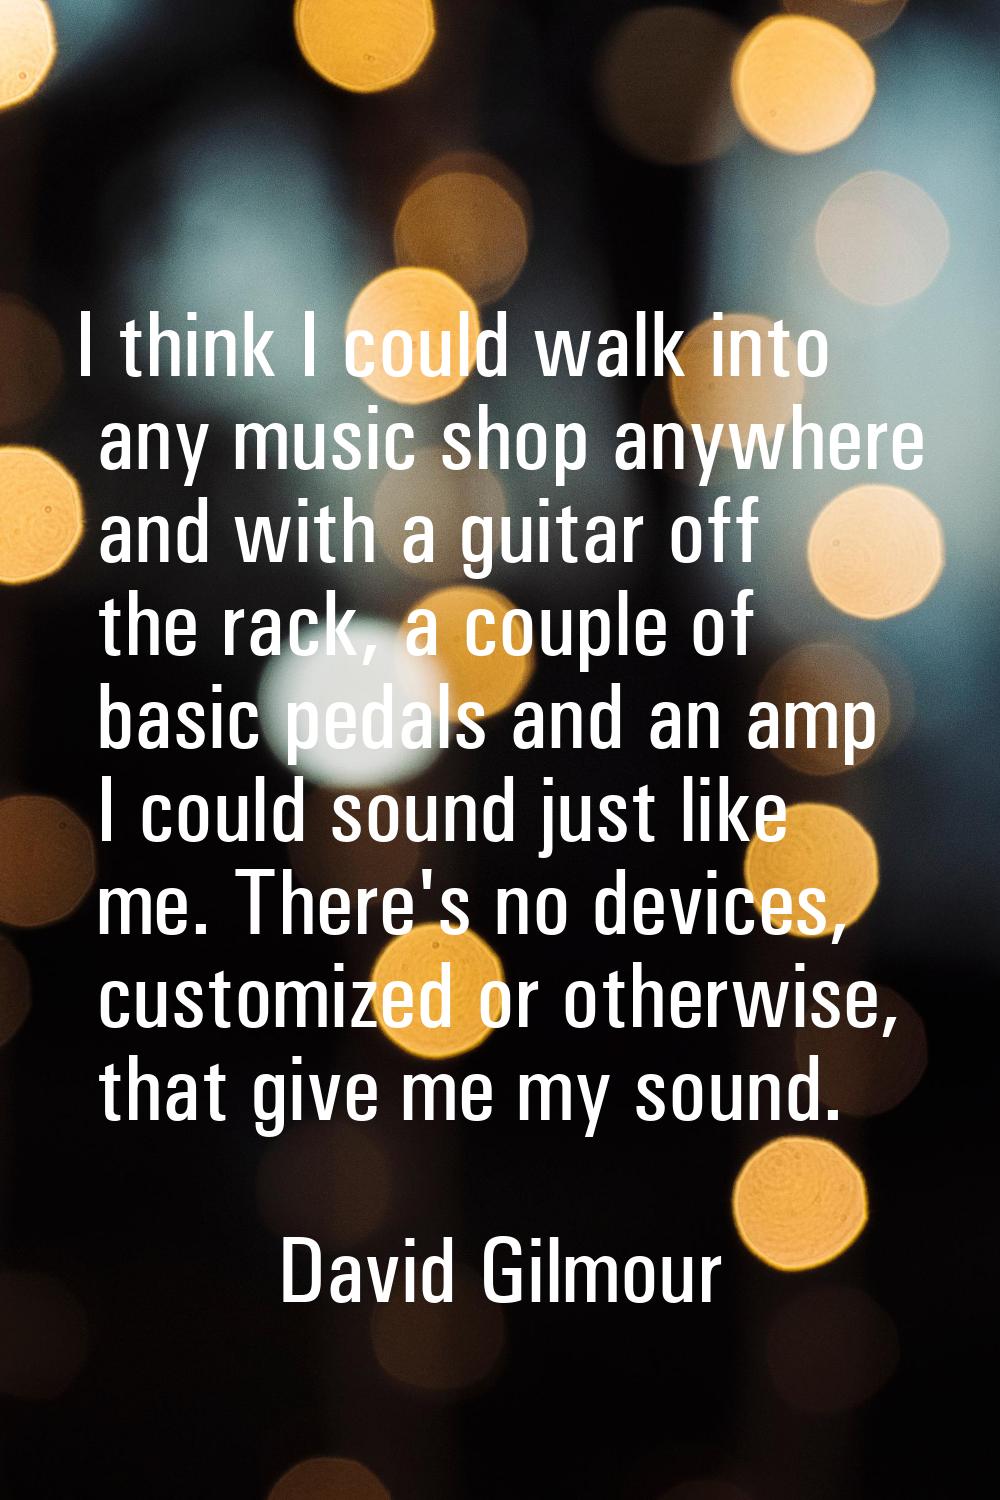 I think I could walk into any music shop anywhere and with a guitar off the rack, a couple of basic